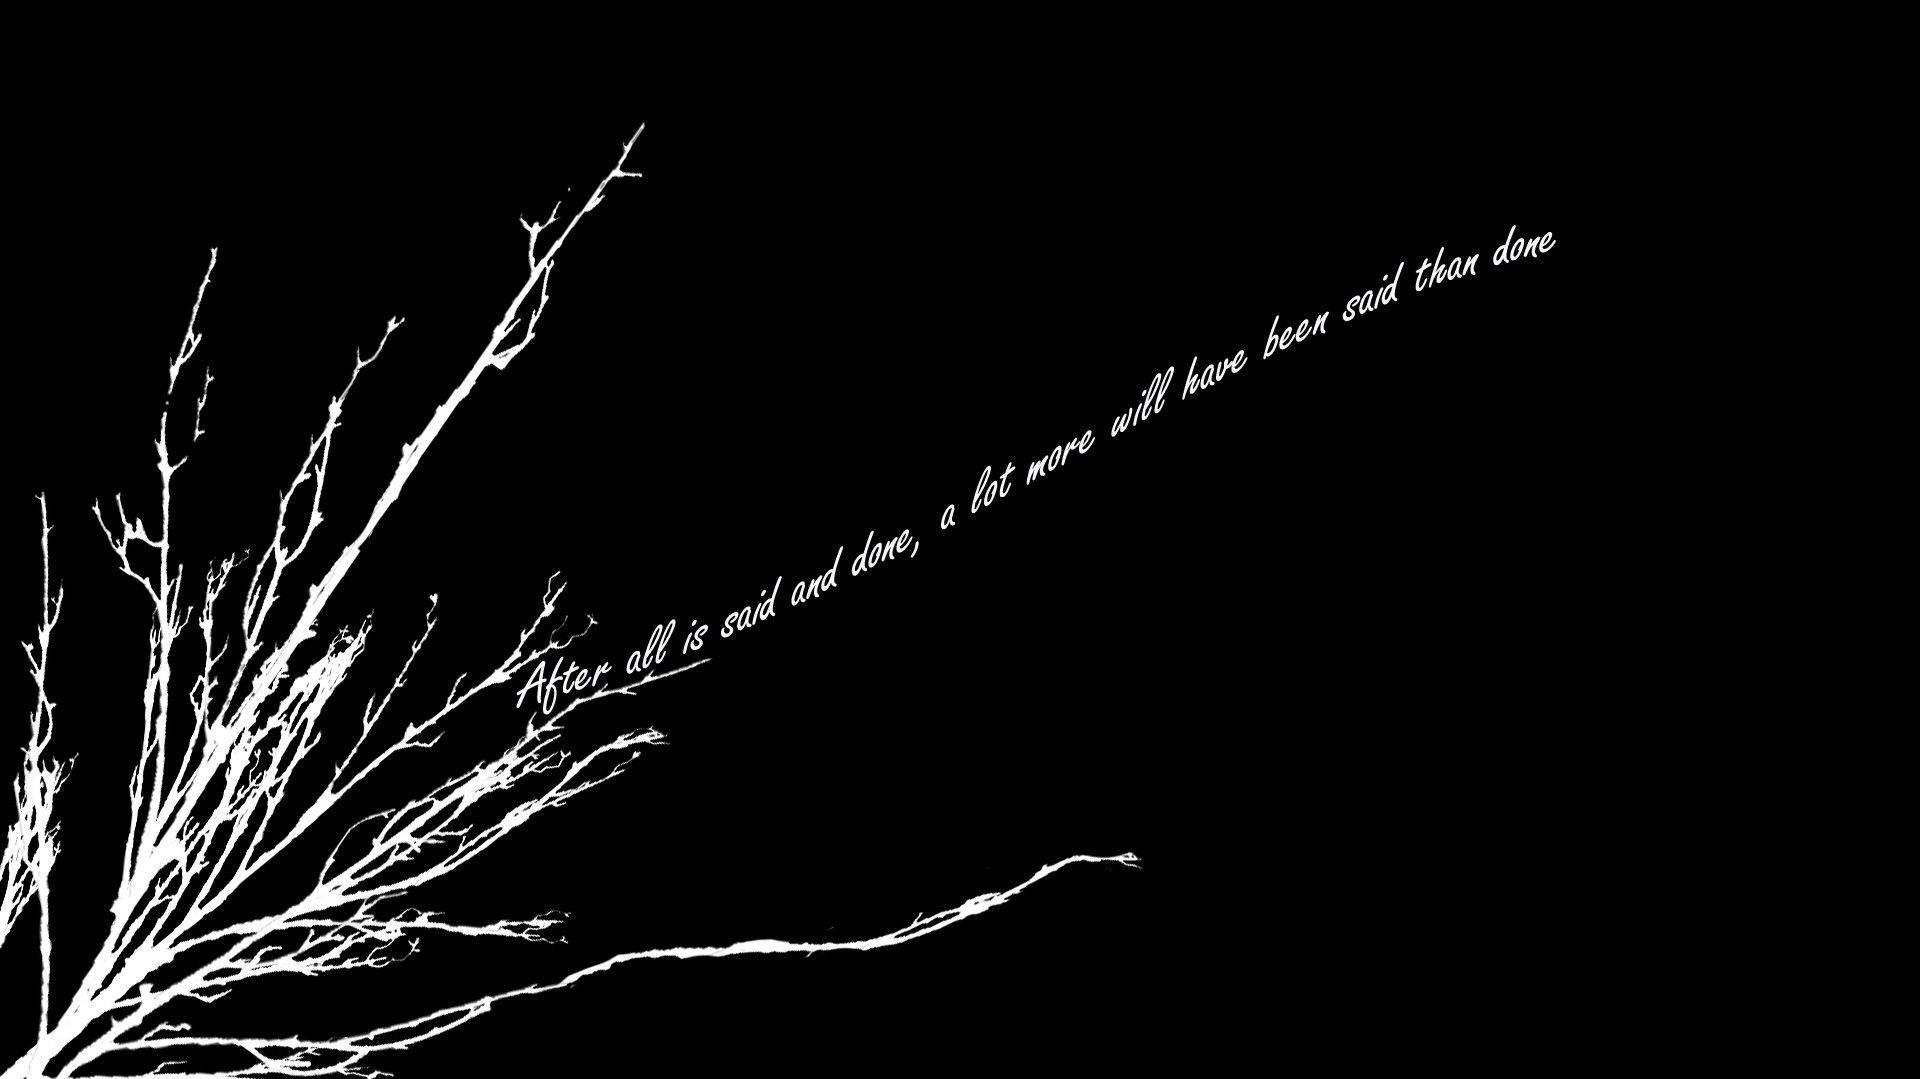 Dark Aesthetic Puter With Quote Wallpaper